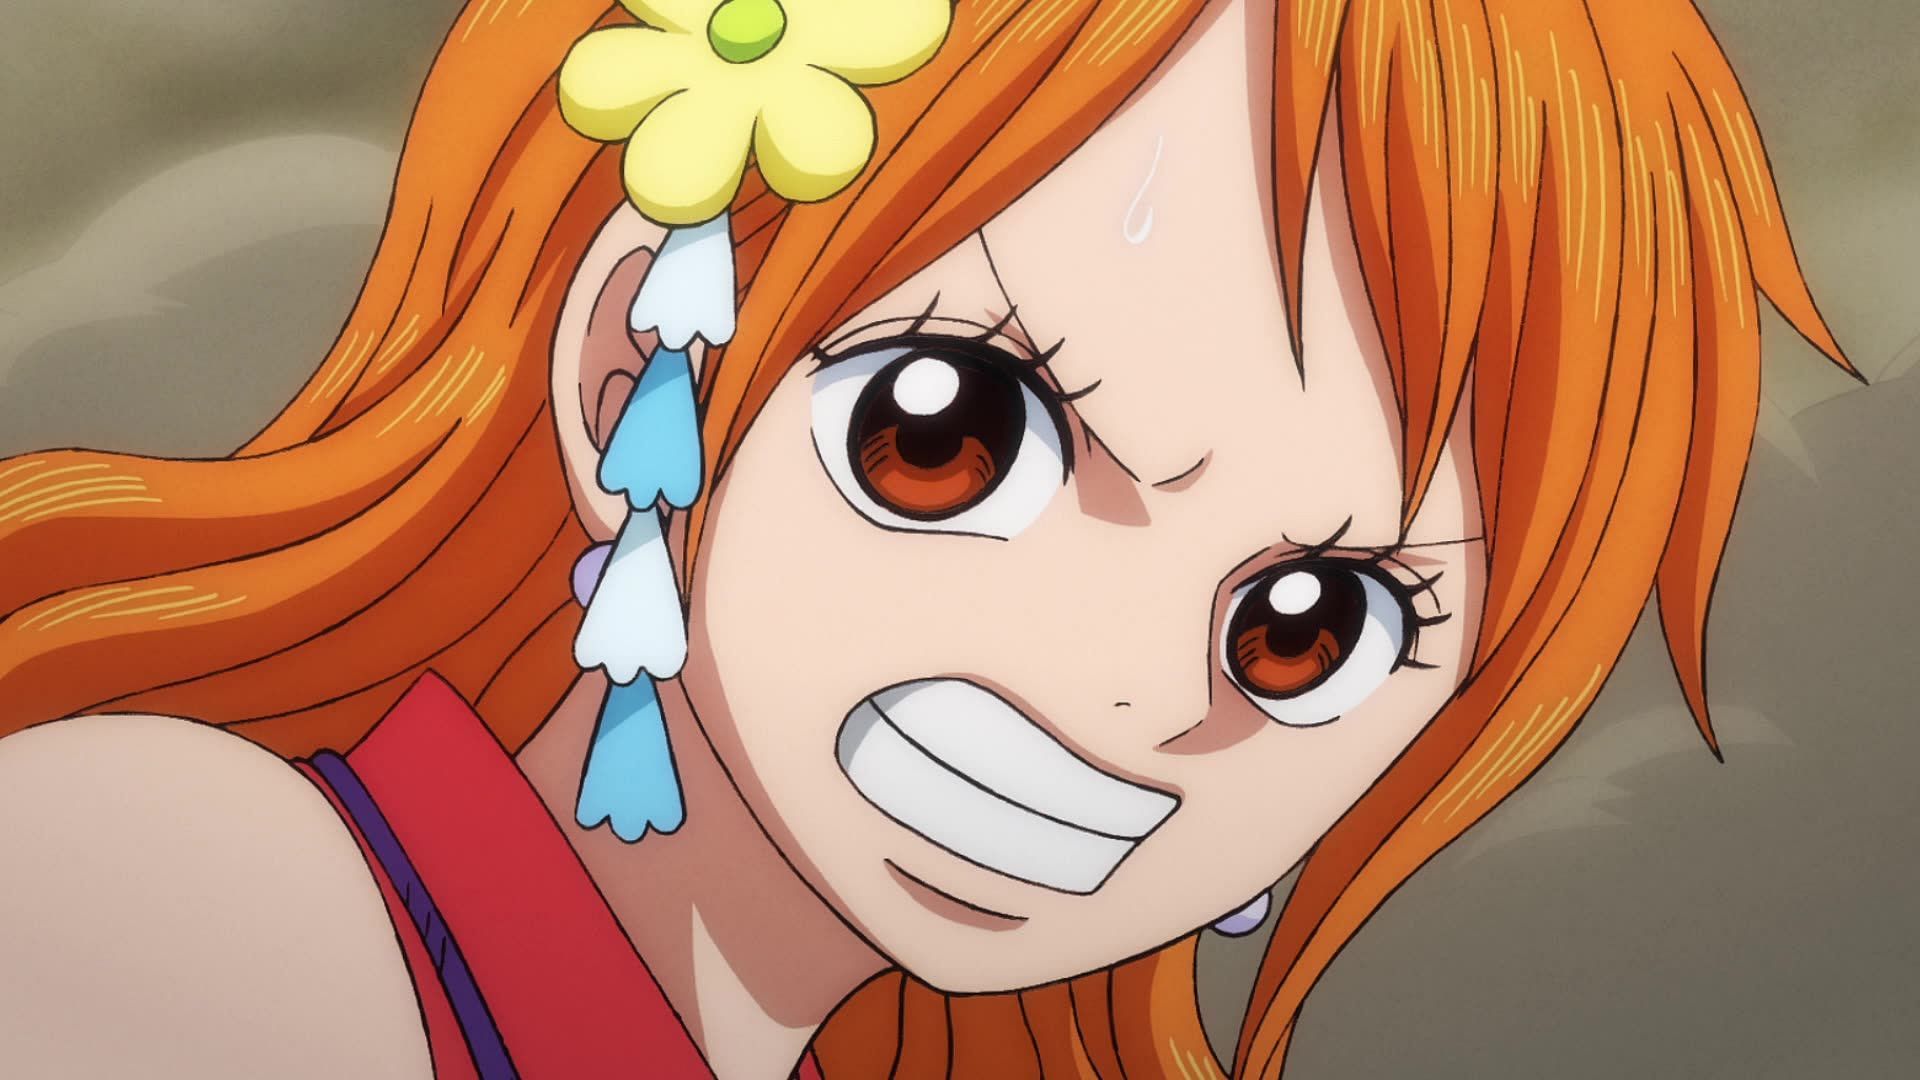 Nami as seen in One Piece (Image via Toei Animation)